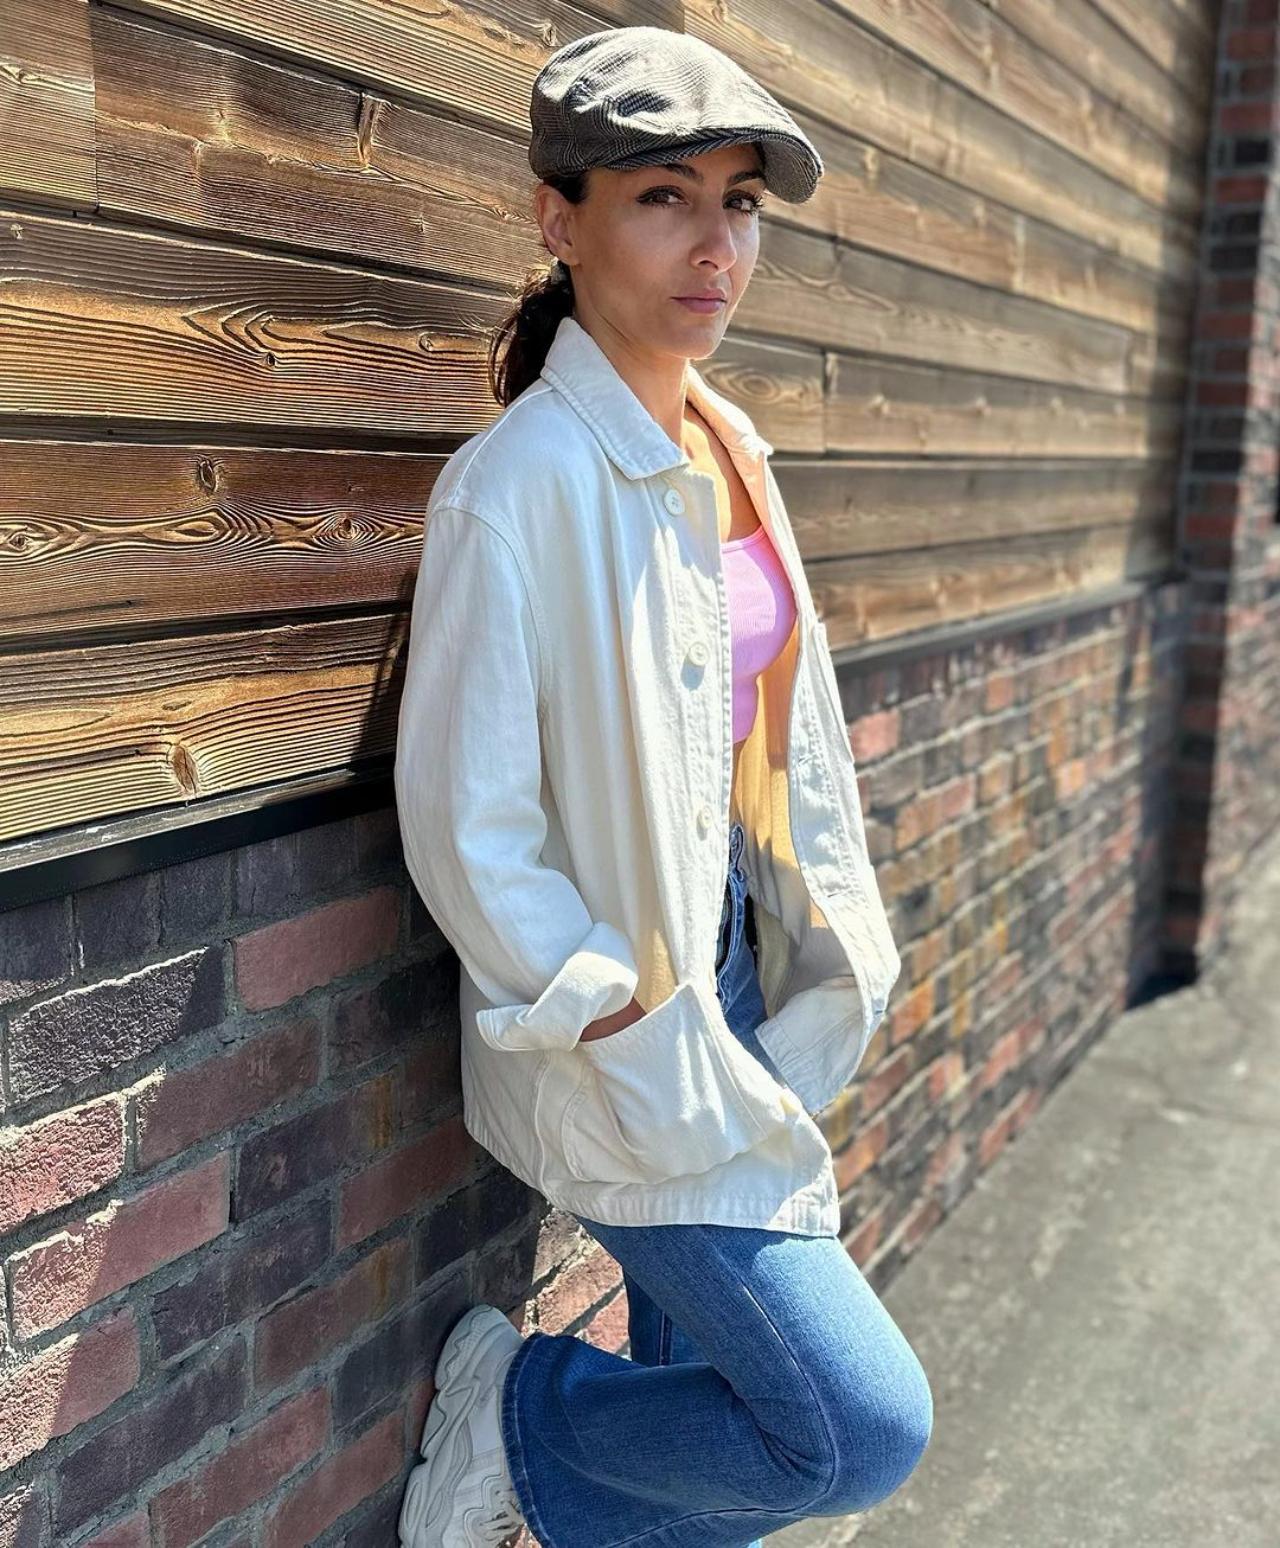 Soha looks laid back in her classy outfit - white shirt, jeans and a Sherlock Holmes style cap? No better way to explore and do a little sleuthing (for the best cafes of course) on holiday